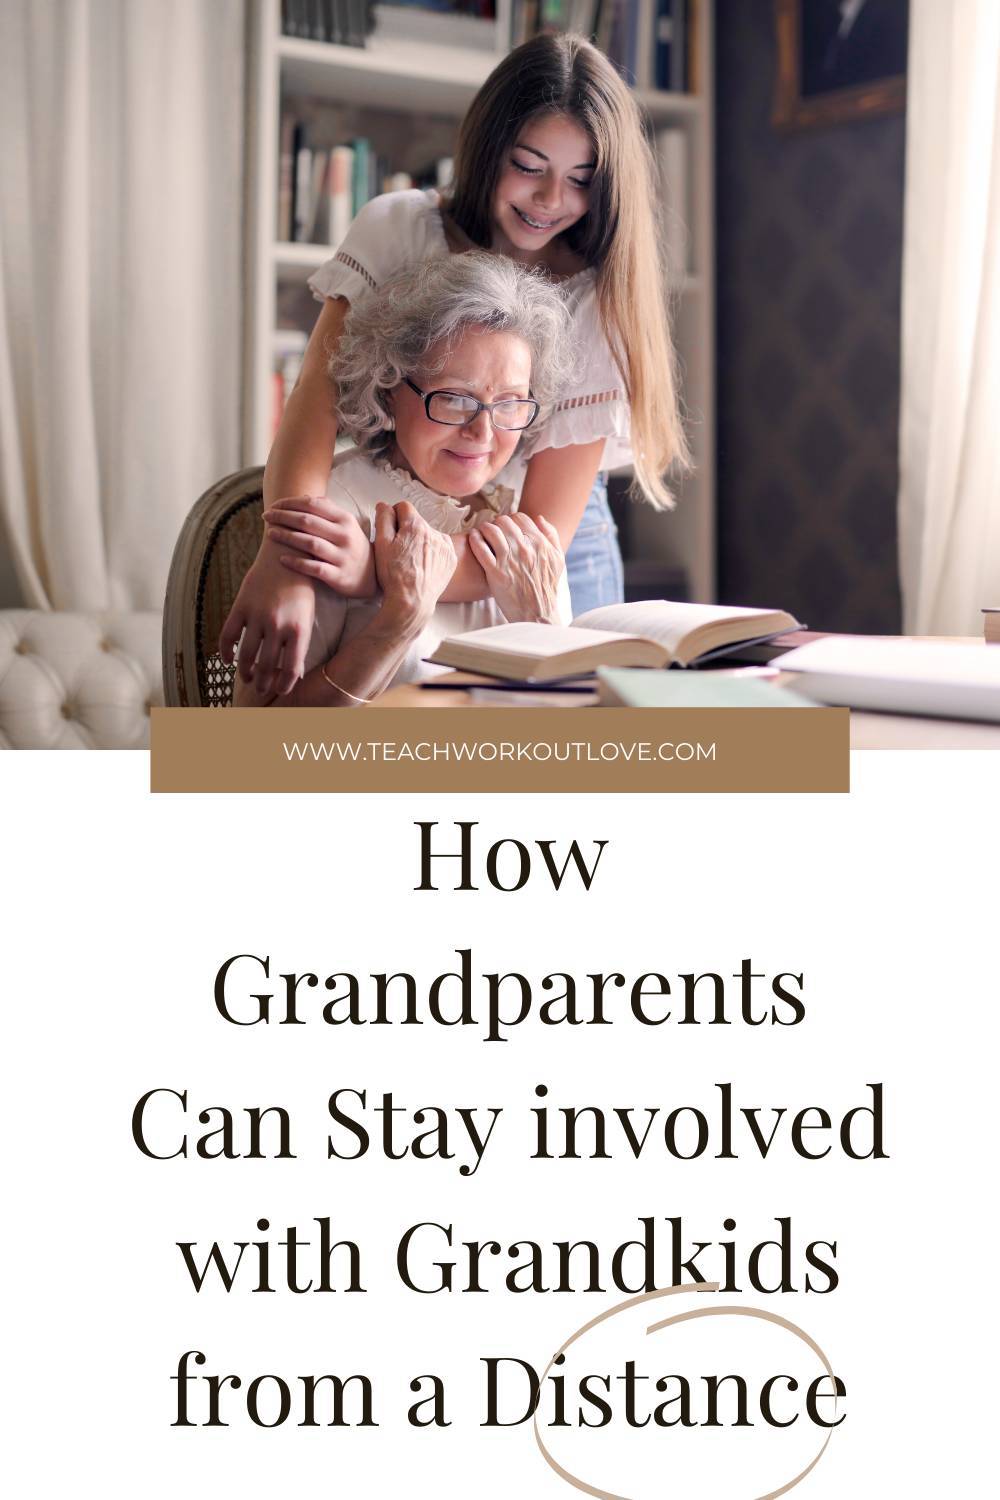 Are you struggling to stay connected with grandkids during this pandemic? We have the solution for you! Read on to see how to be connected. 